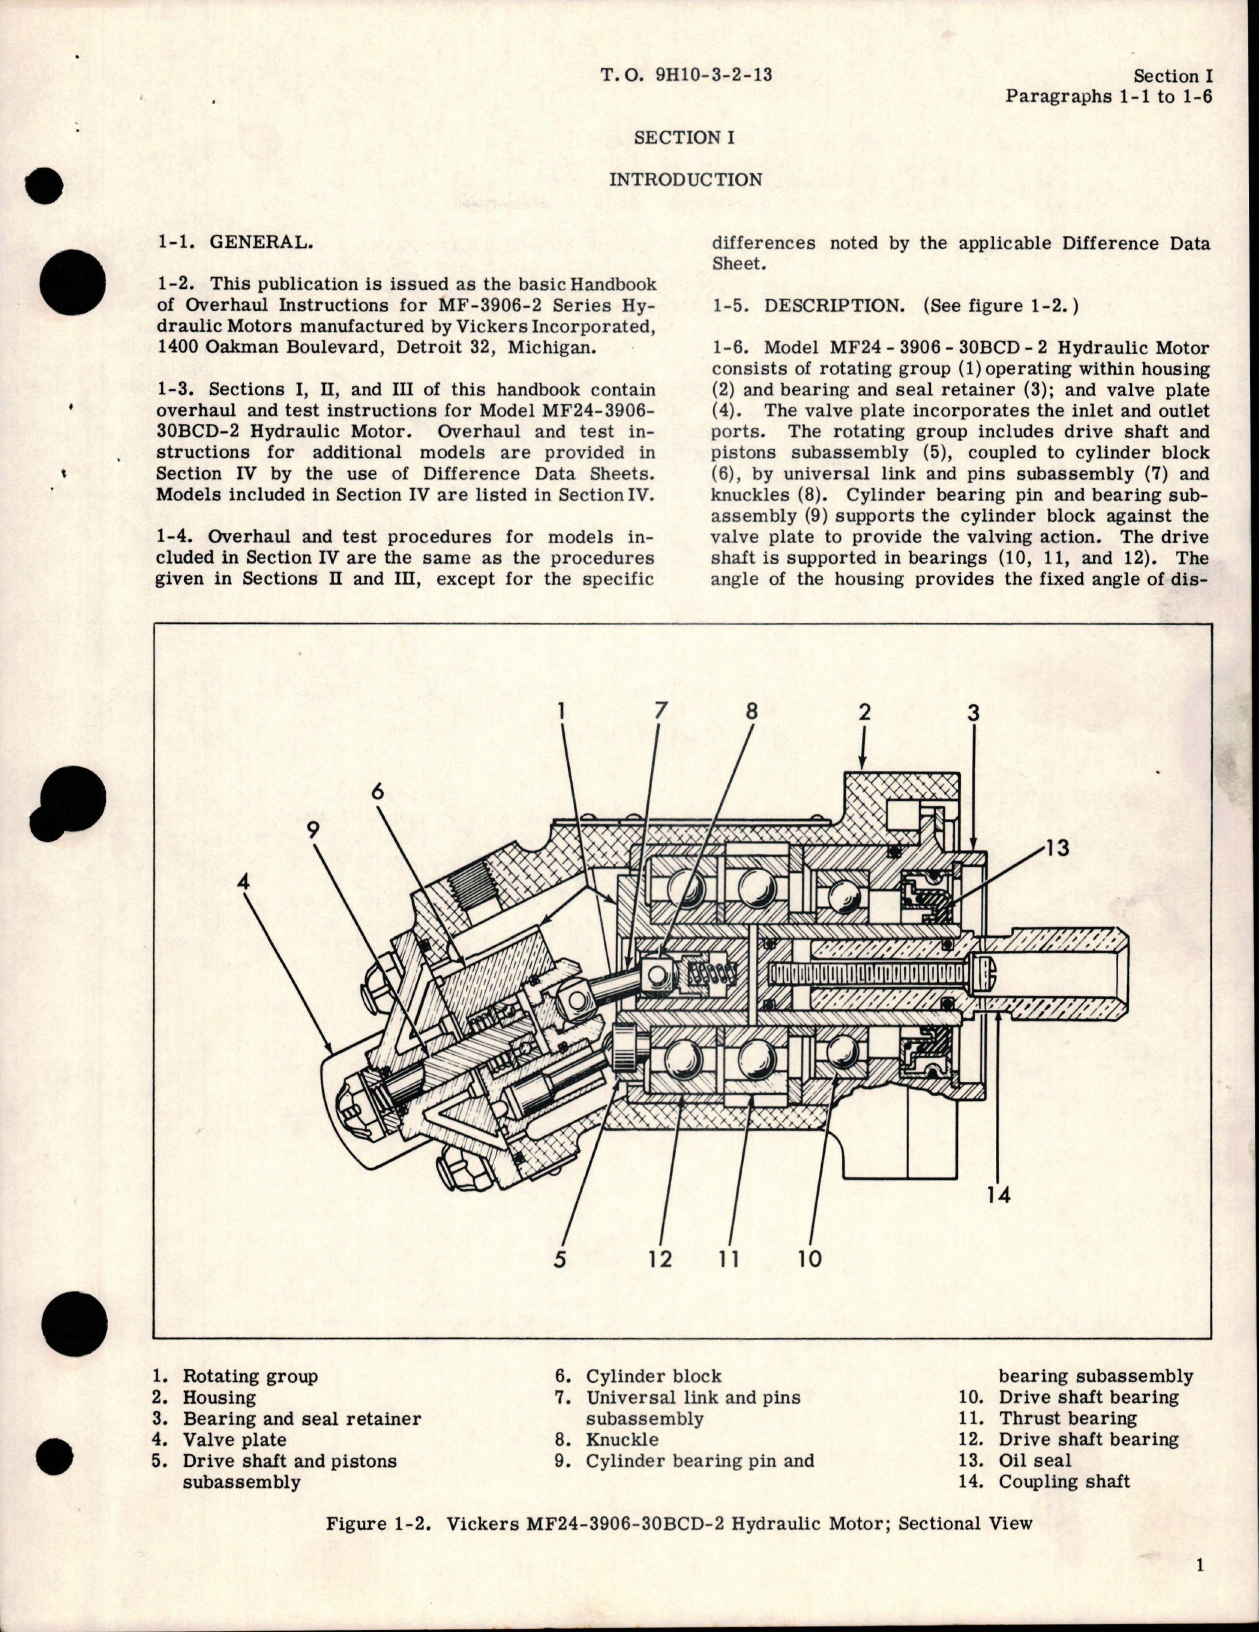 Sample page 5 from AirCorps Library document: Overhaul Instructions for Hydraulic Motor Assemblies - MF-3906-2